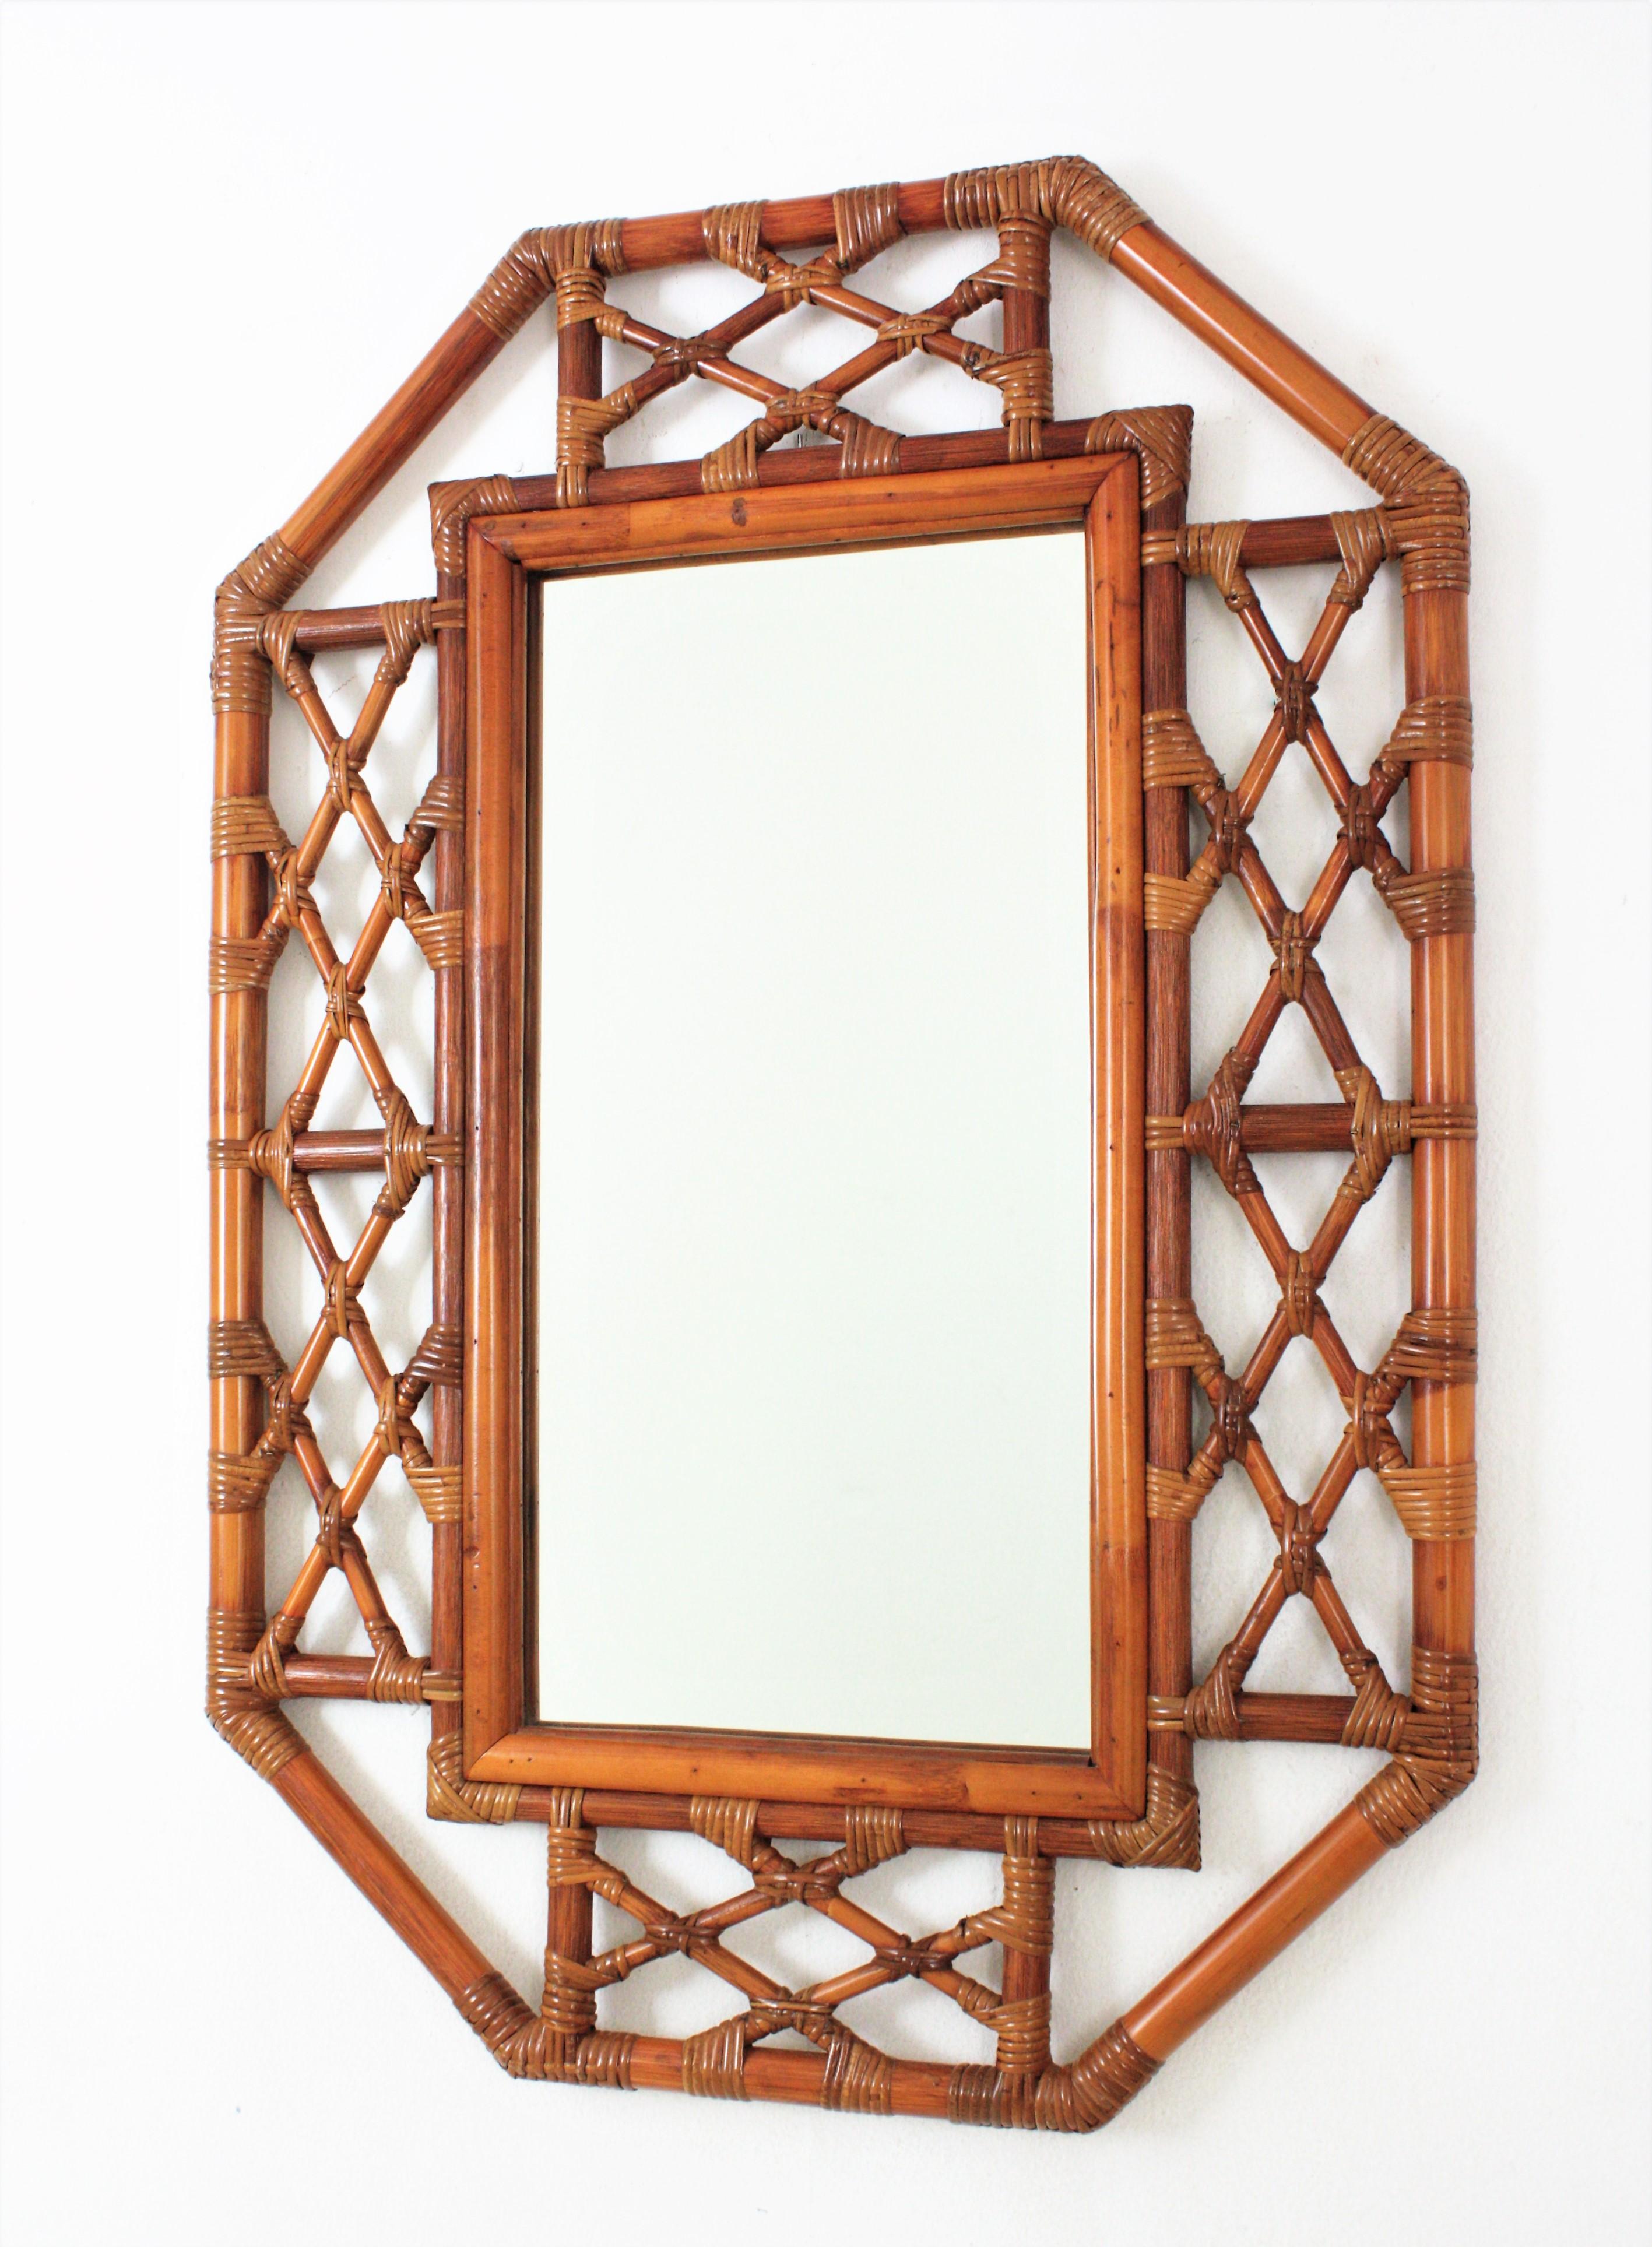 20th Century Spanish Large Rattan Bamboo Octagonal Wall Mirror For Sale